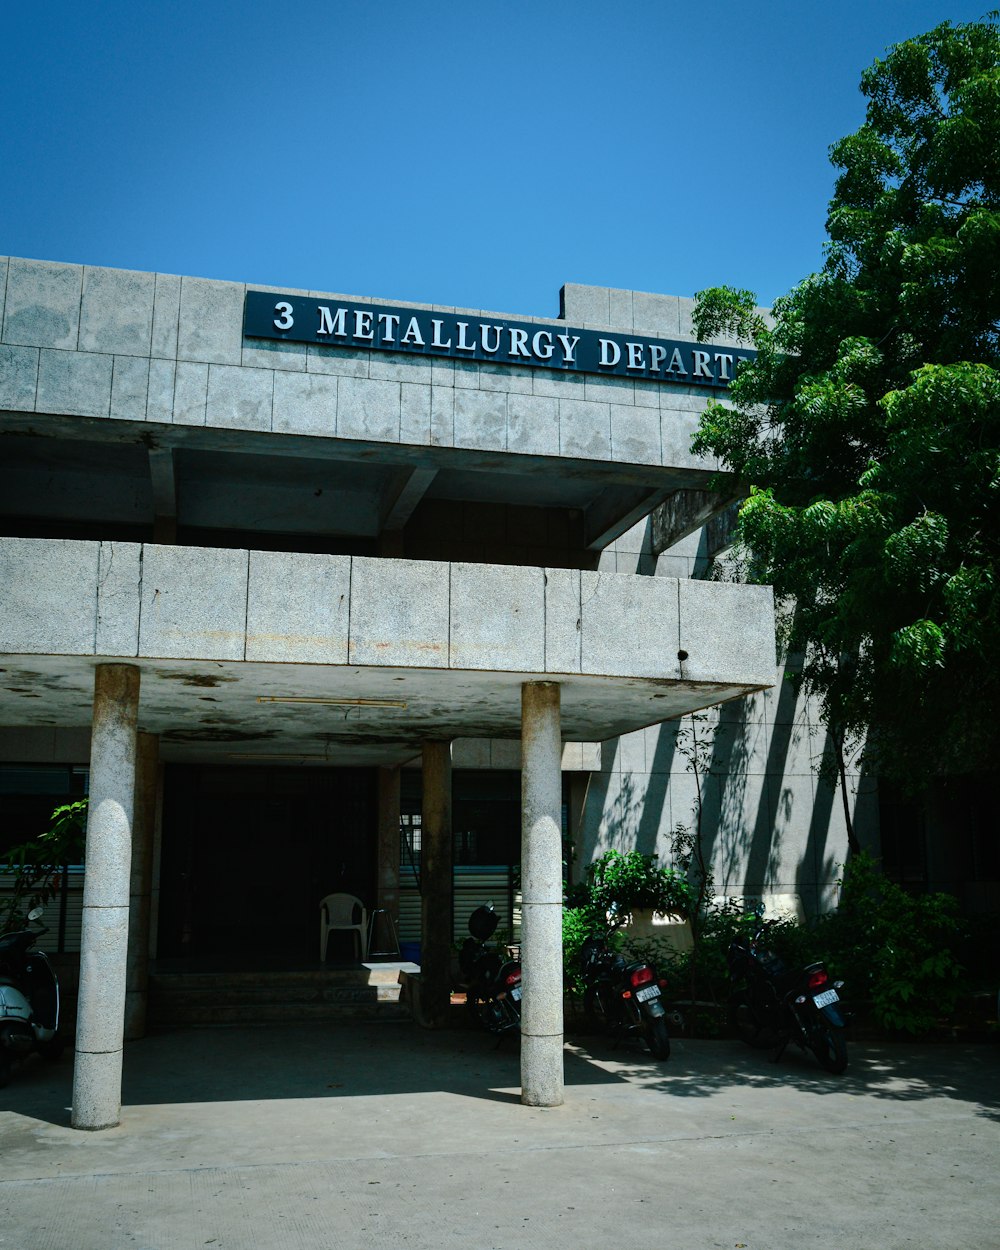 a building with a sign that reads 3 metallurgy depart